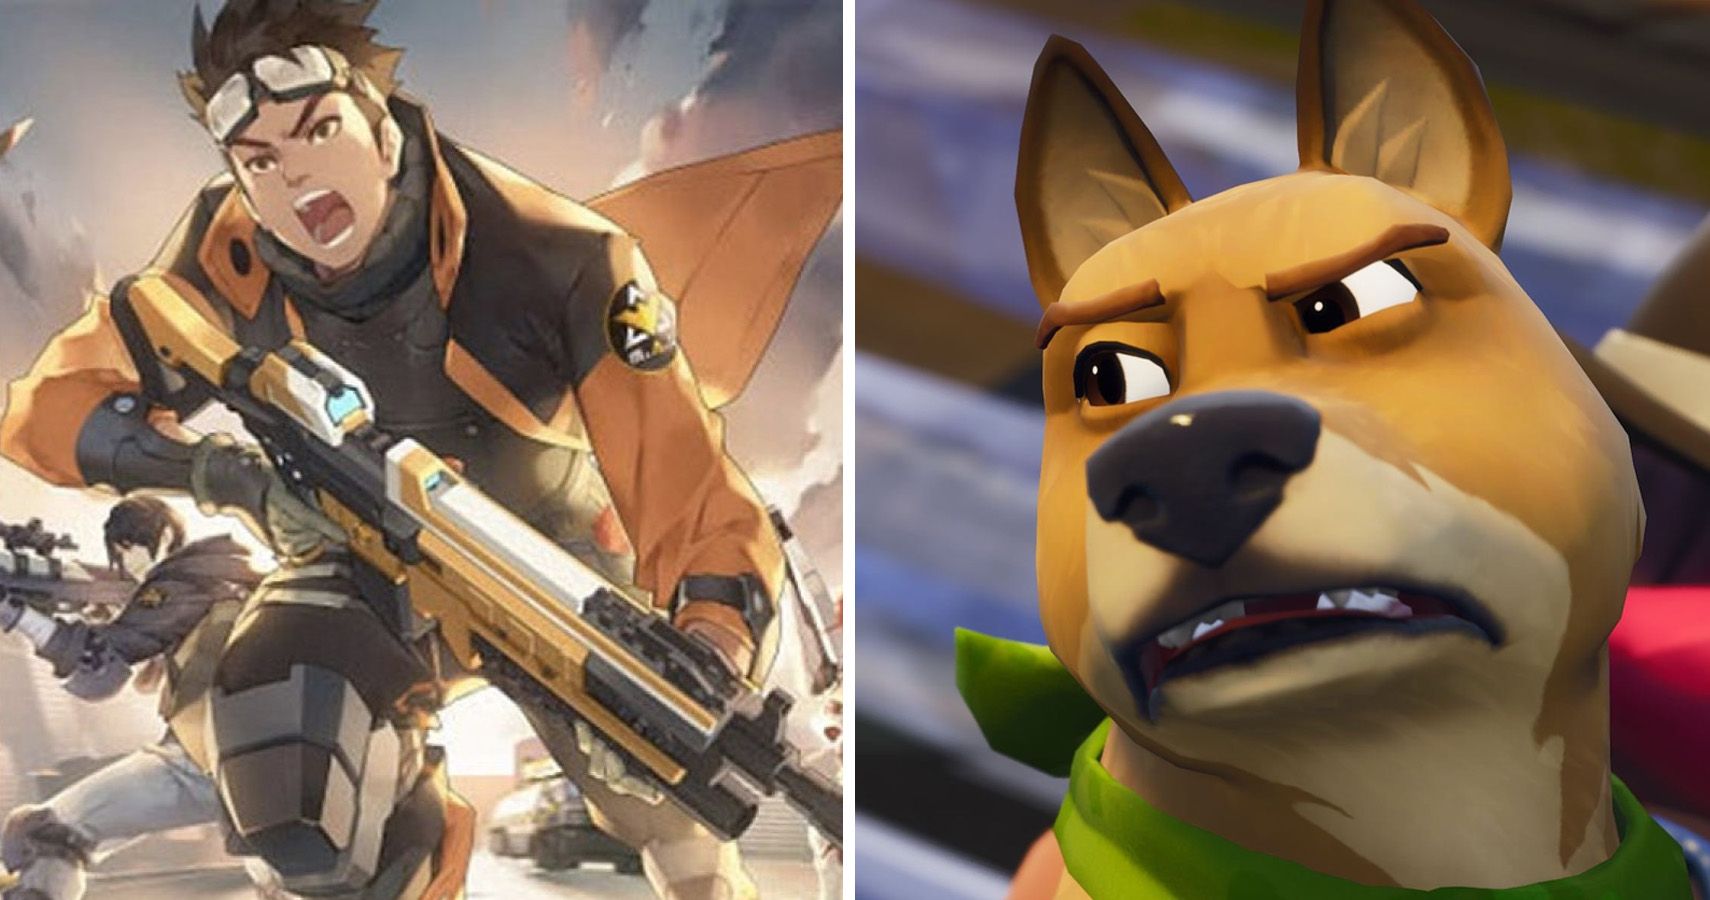 Overwatch Clone Sets Itself Apart With DogBased Battle Royale Mode